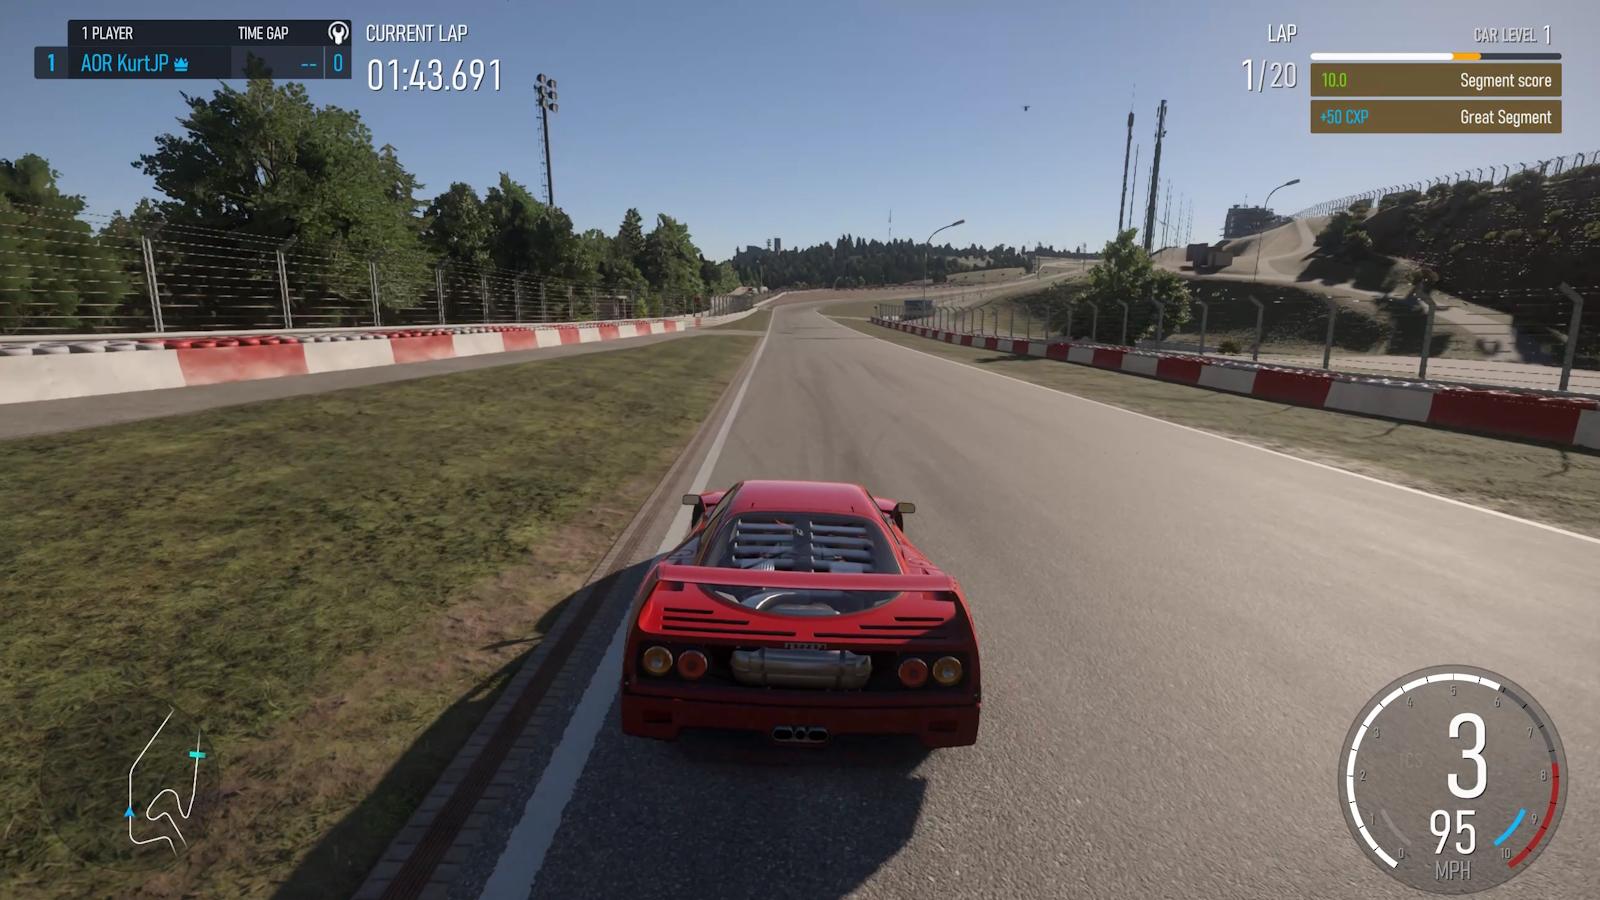 Ferrari F40 lapping Nurburgring GP to get fast car levels in Forza Motorsport.